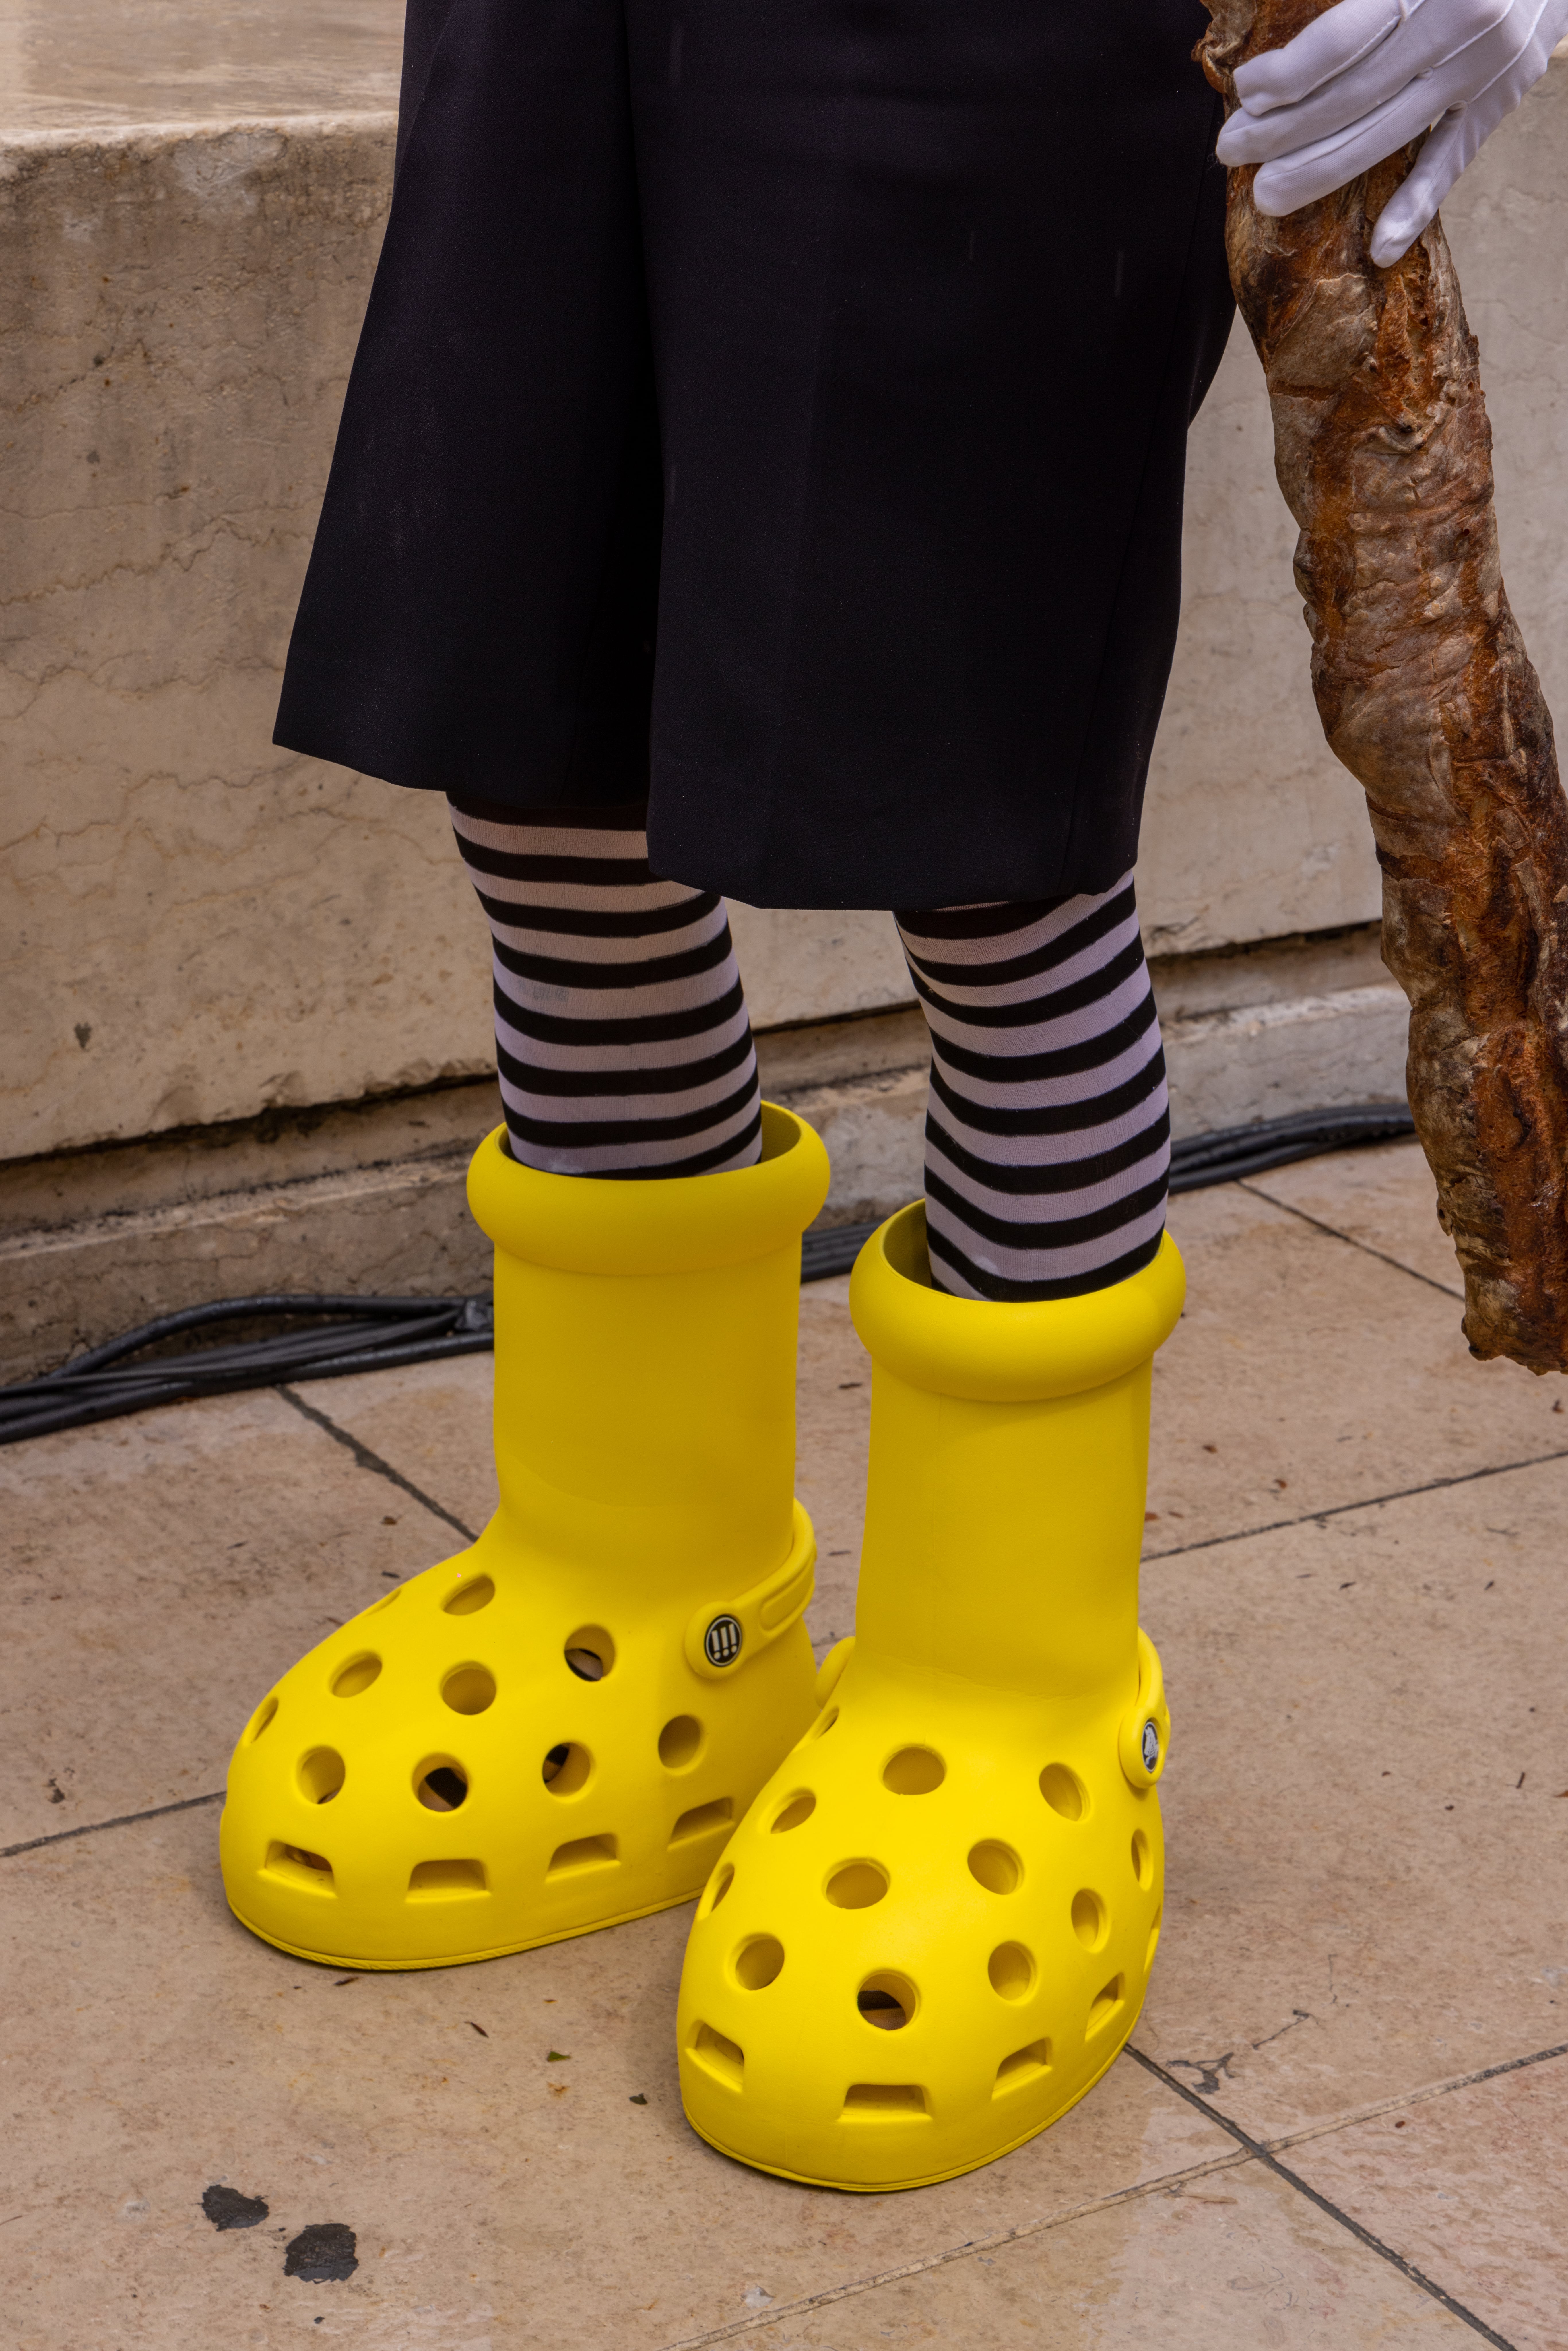 MSCHF and Crocs Release Big Yellow Boots Collaboration | POPSUGAR Fashion